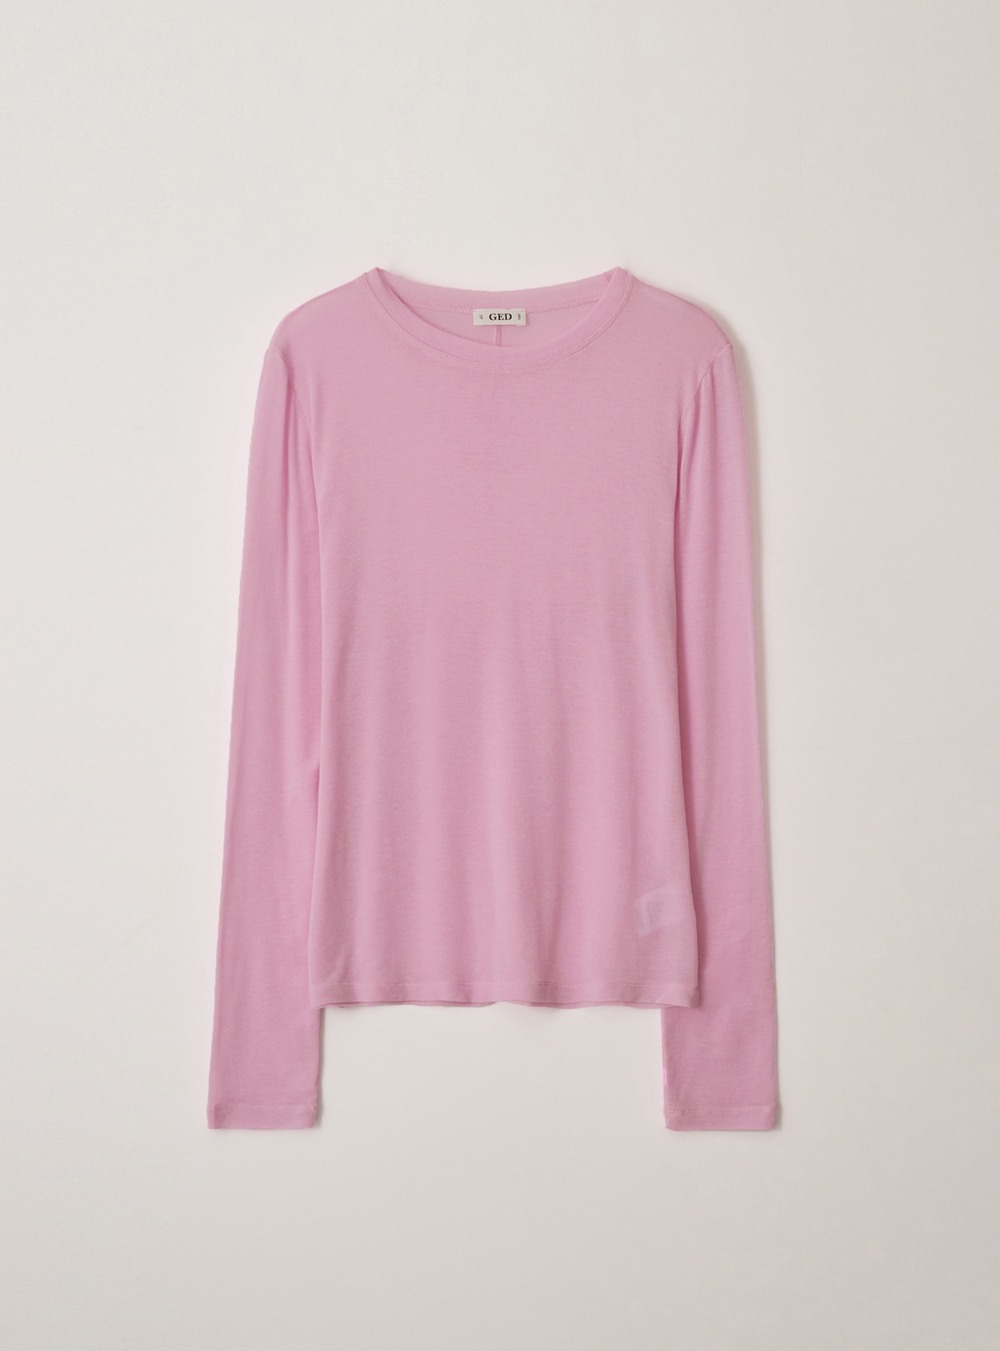 2ND_LAYERED SLEEVE TOP - PINK